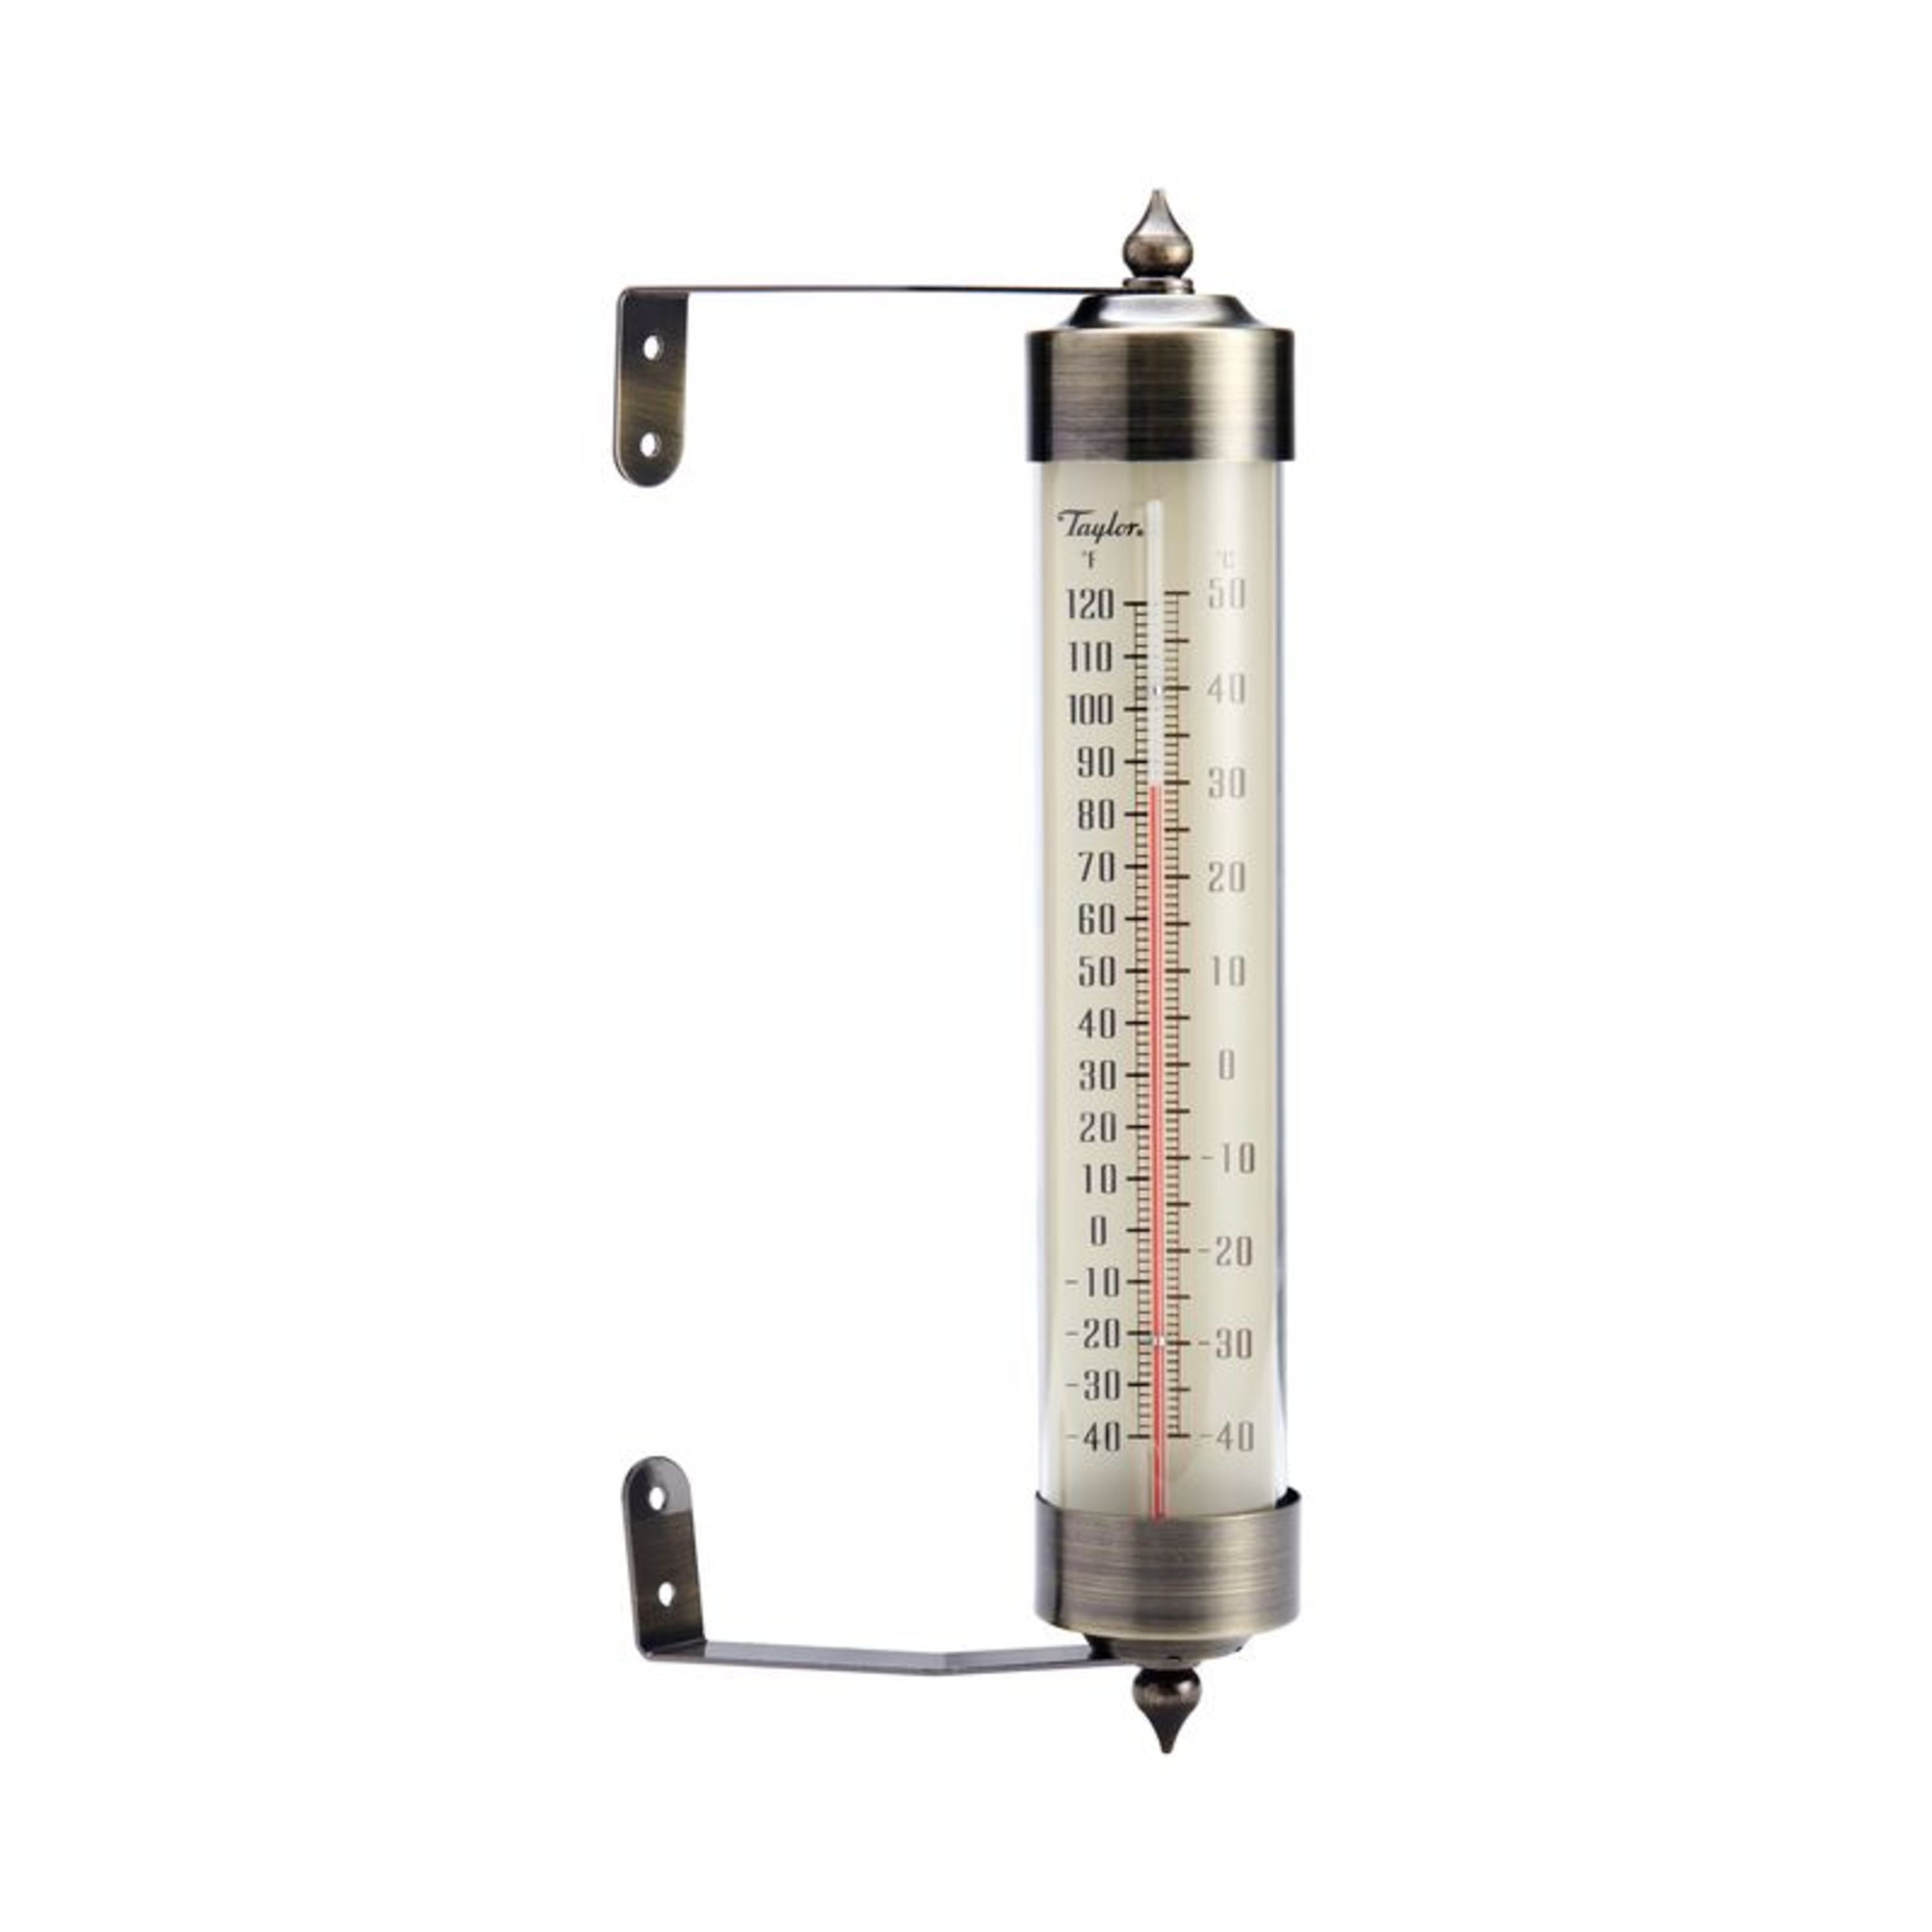 Taylor Heritage Metal Tube Indoor Outdoor Thermometer